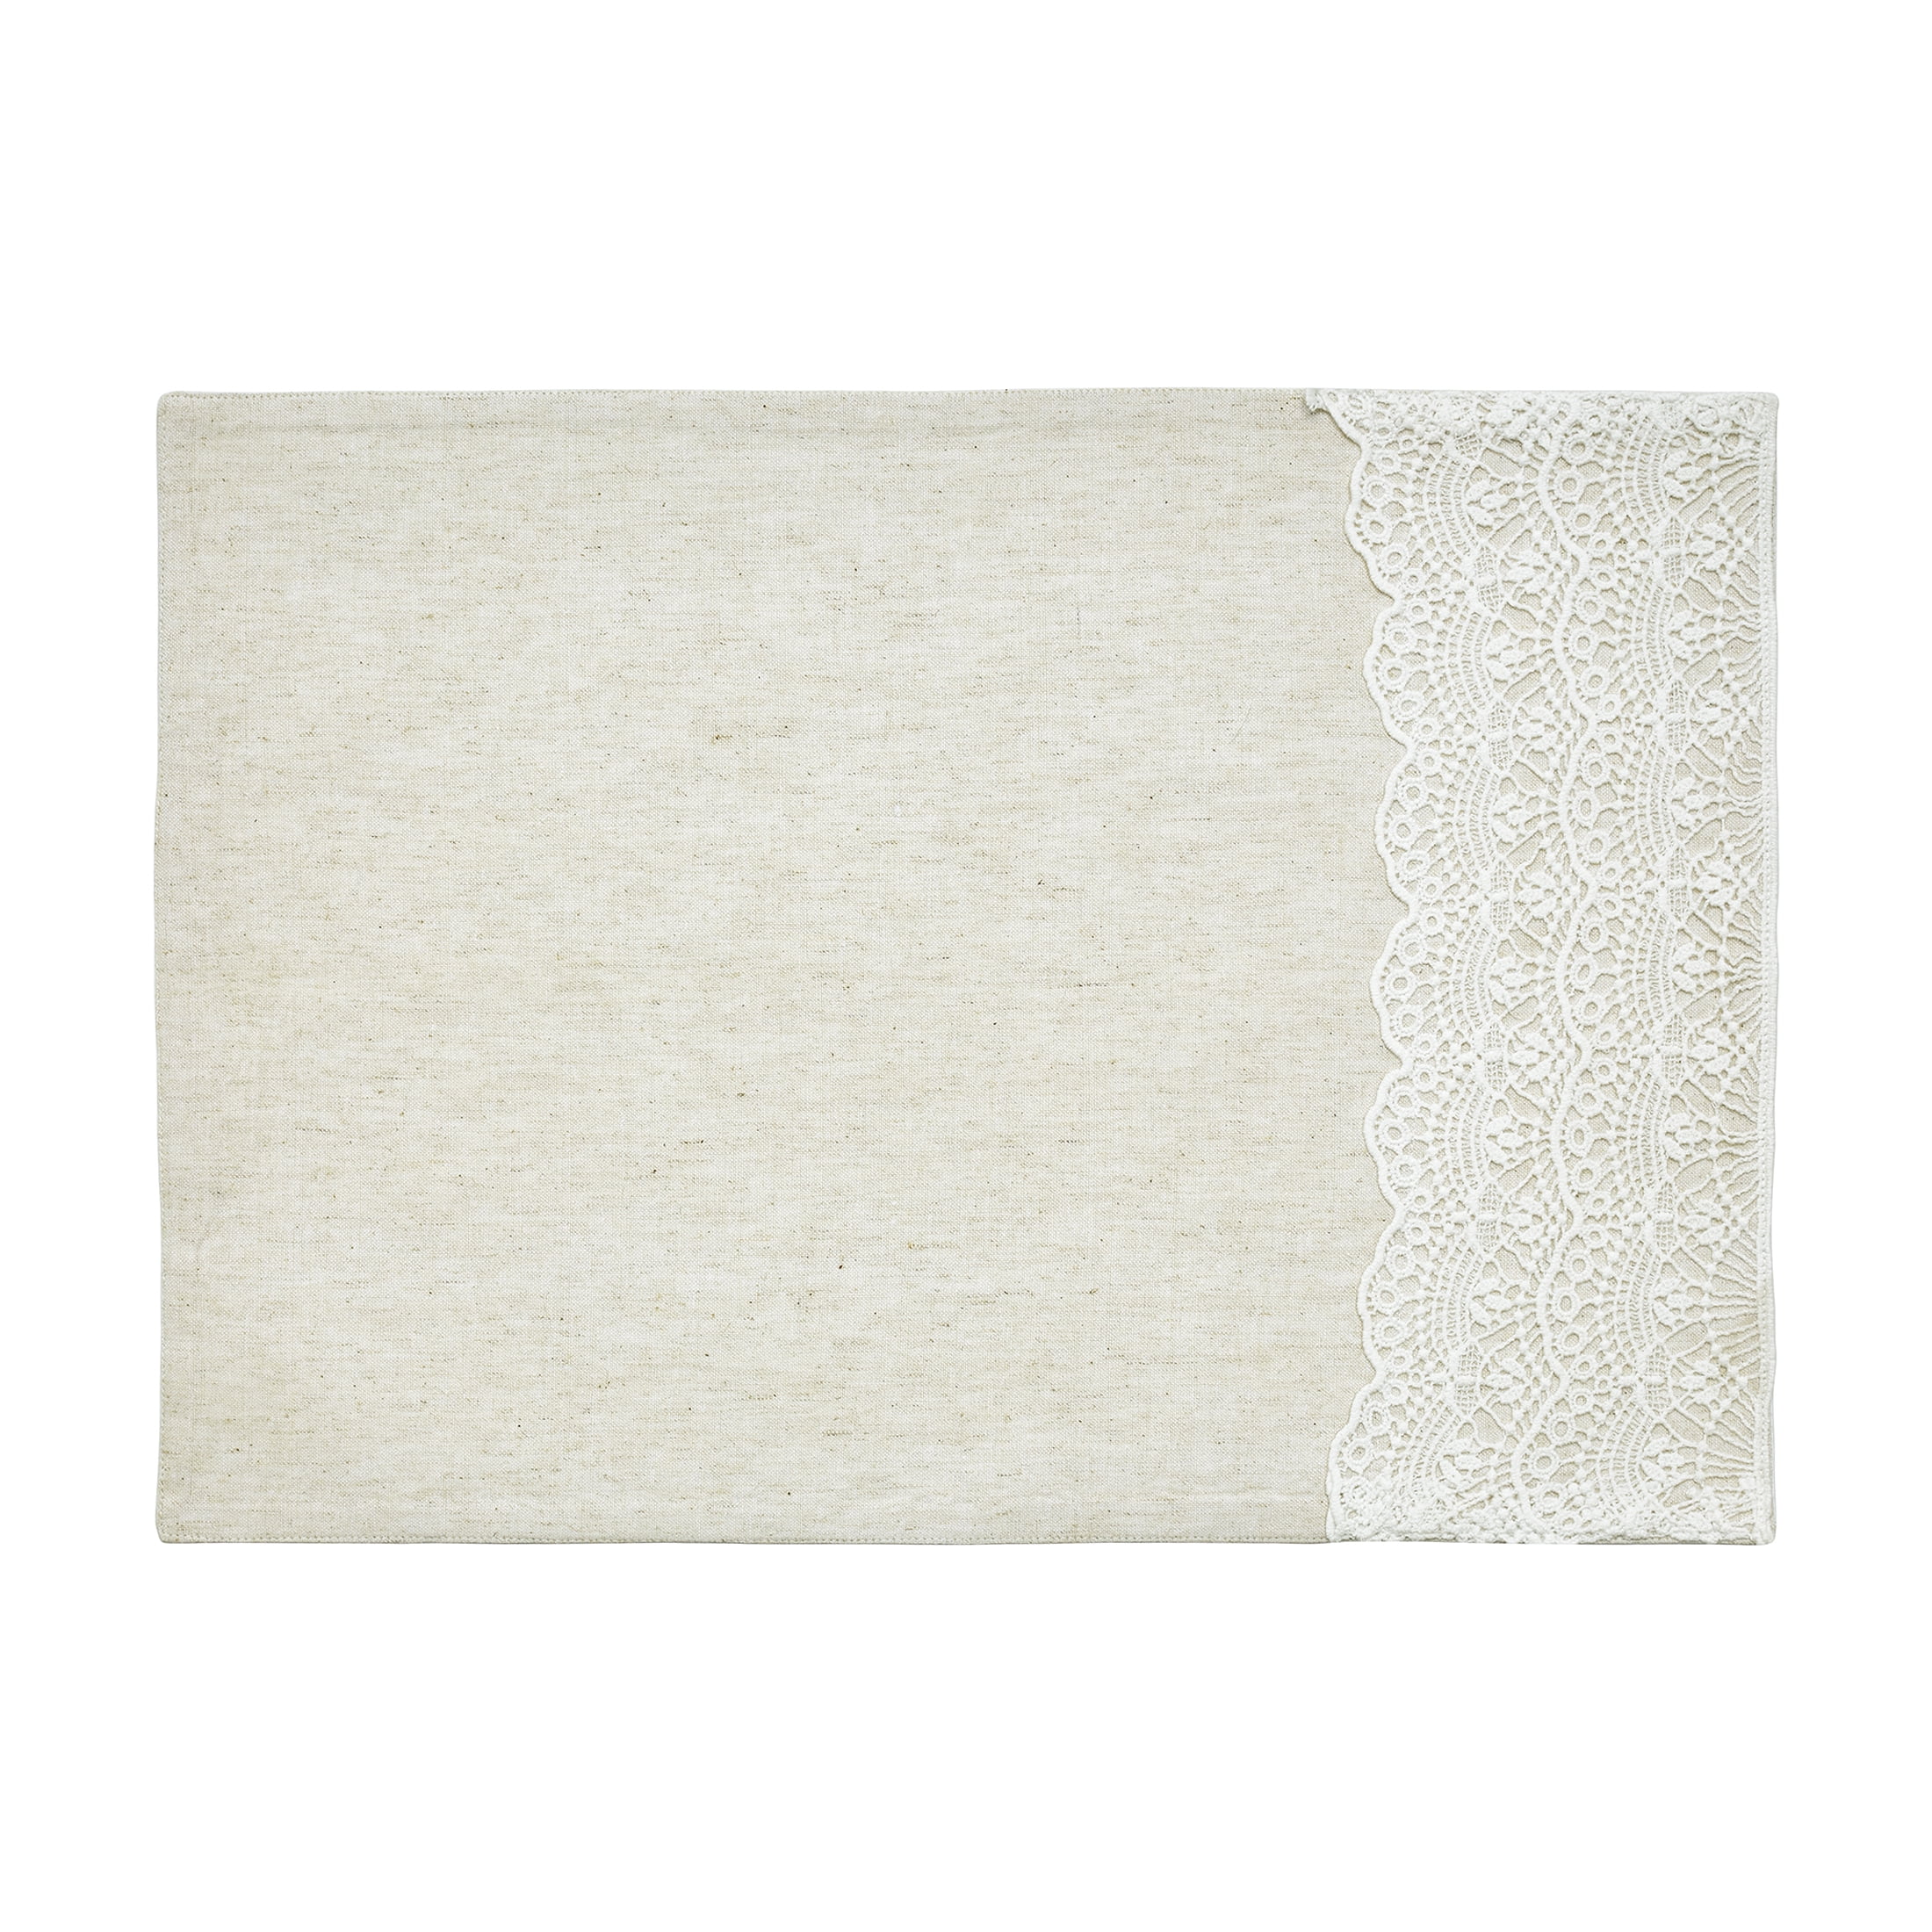 My Texas House Adalee Lace 14" x 20" Table Placemat, Beige, 1 Piece